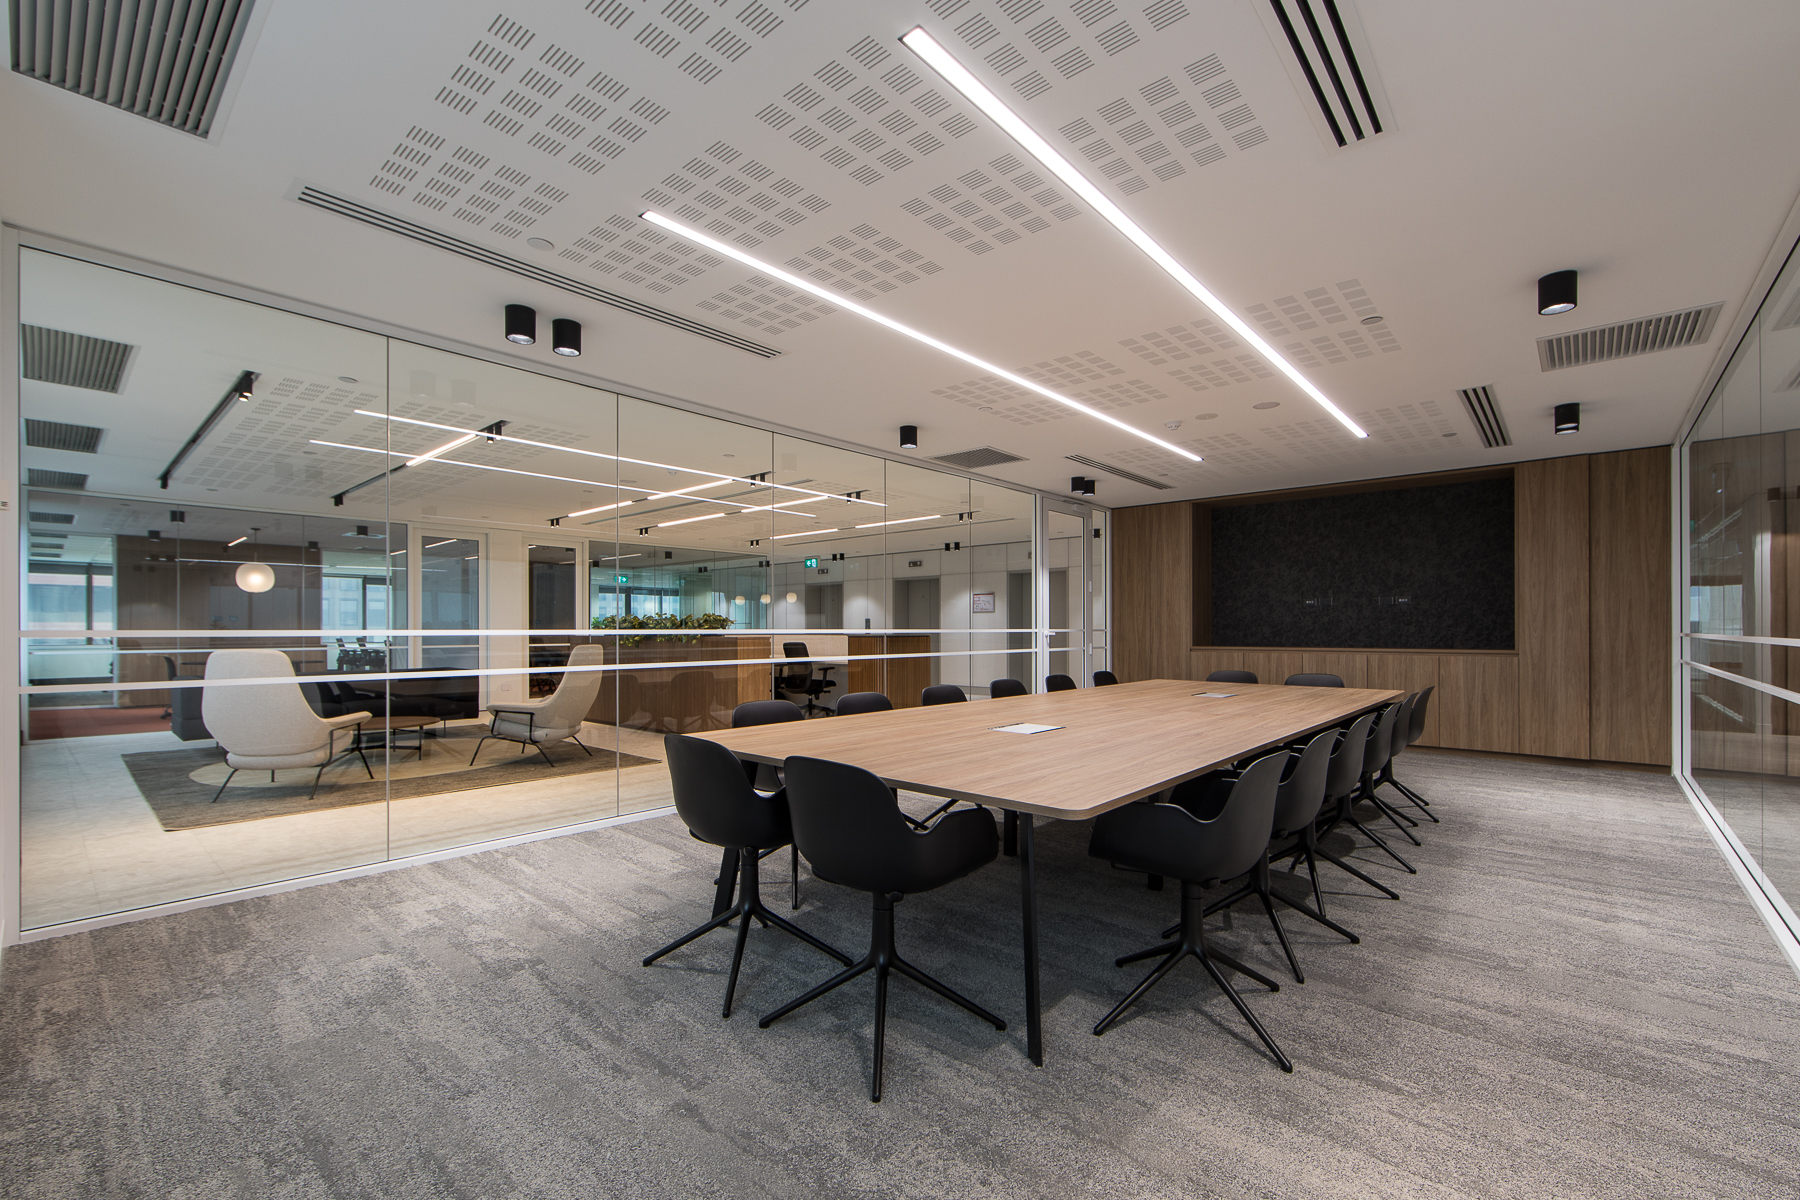 Office boardroom | facilities outsourcing